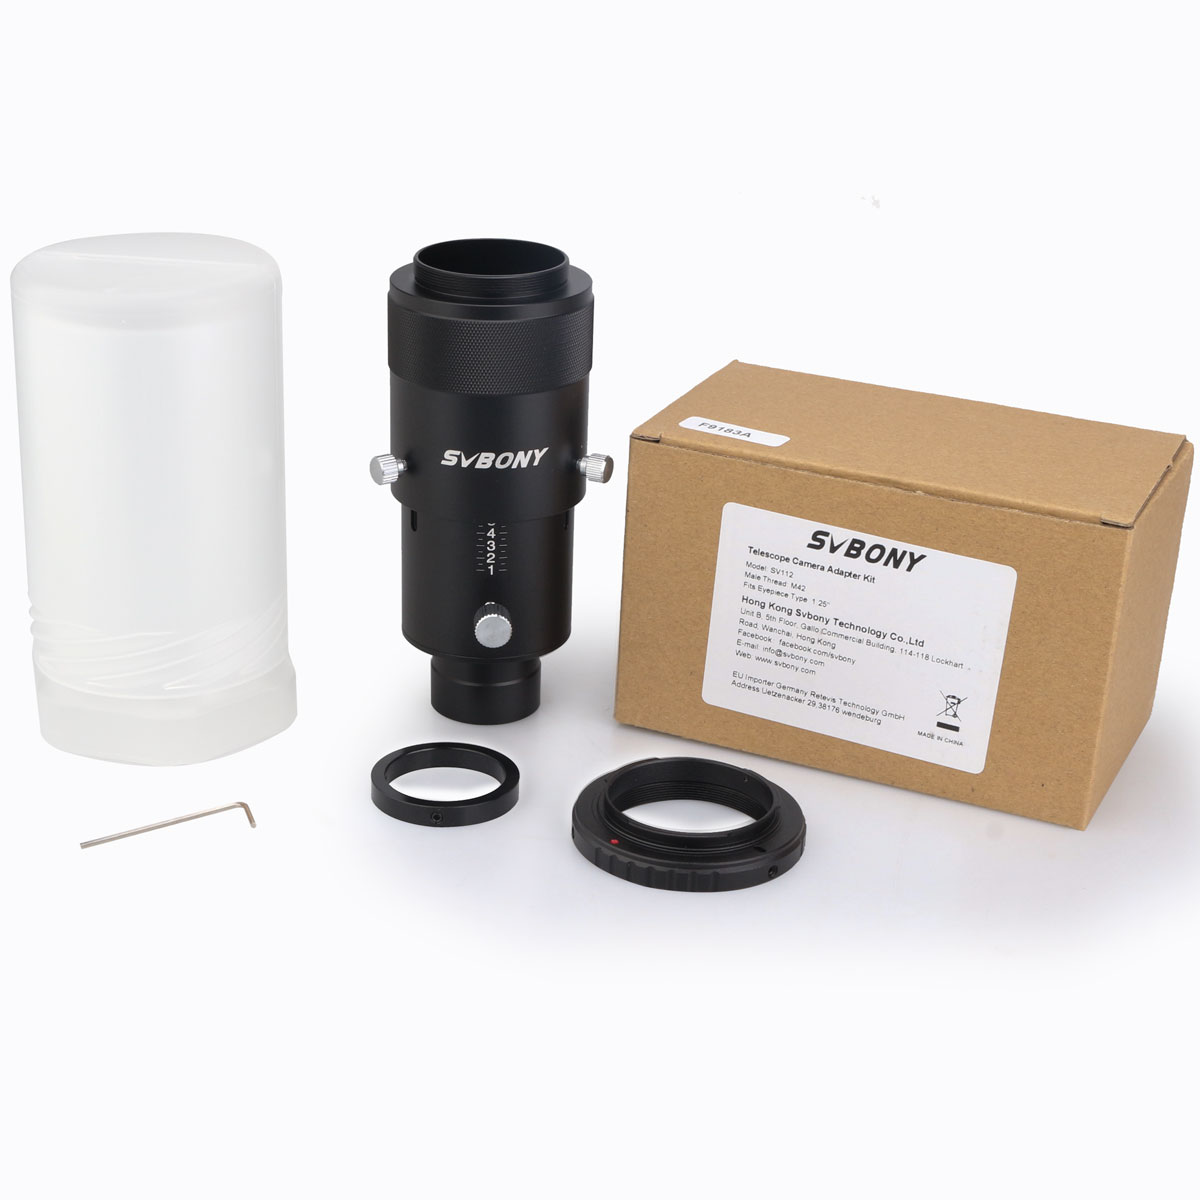 SVBONY-SV112-125quot-Fully-Metal-Deluxe-Variable-Eyepiece-Projection-Kit-for-Telescopes-with-T-Ring--1842642-9